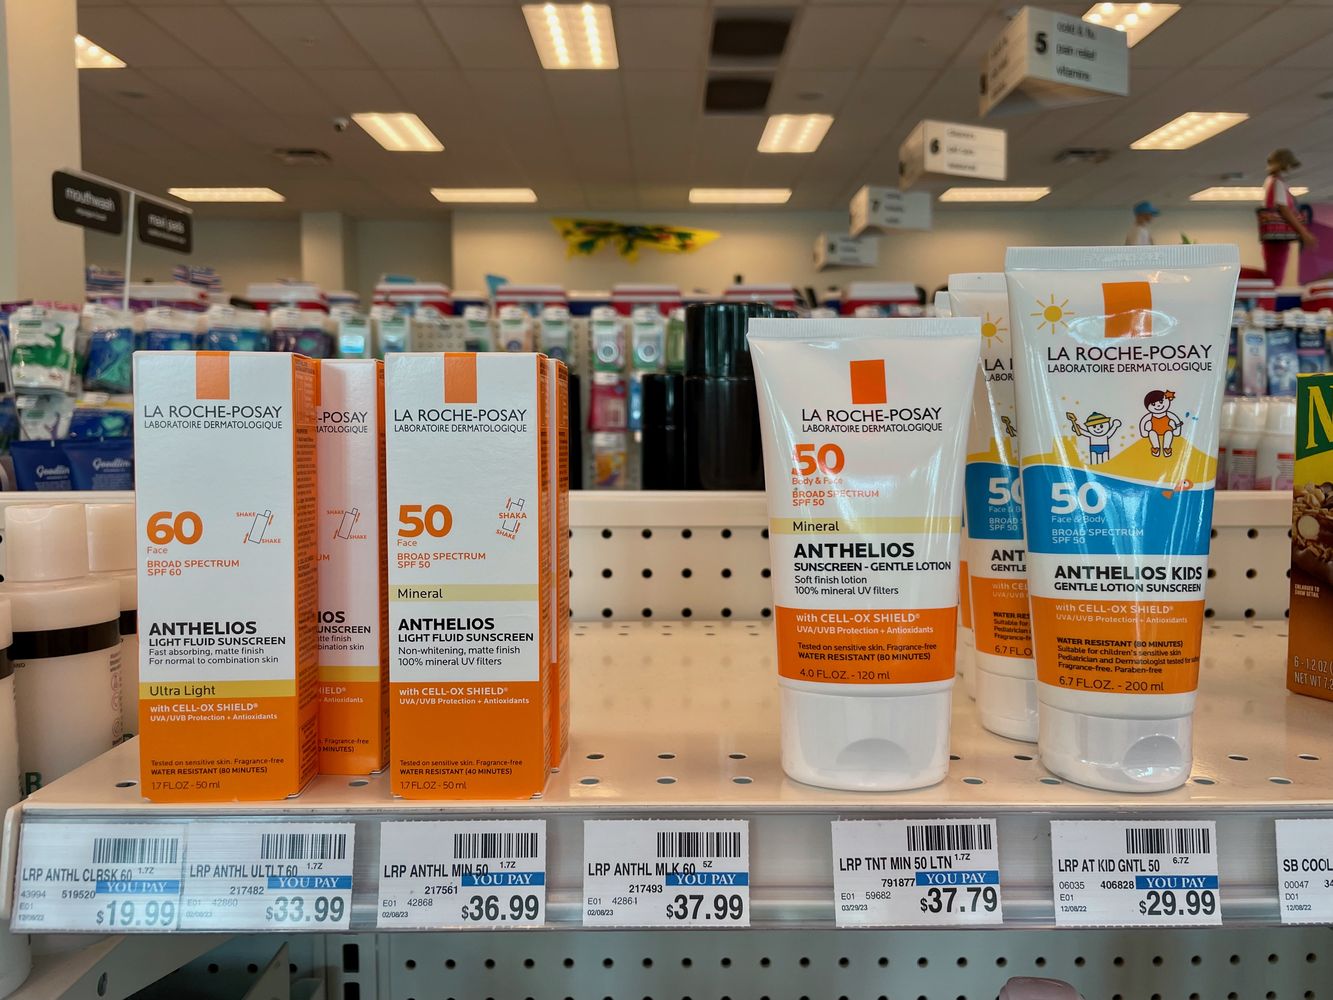 Where to Buy French Pharmacy Skincare Products USA - La Roche-Posay products at Walgreens US